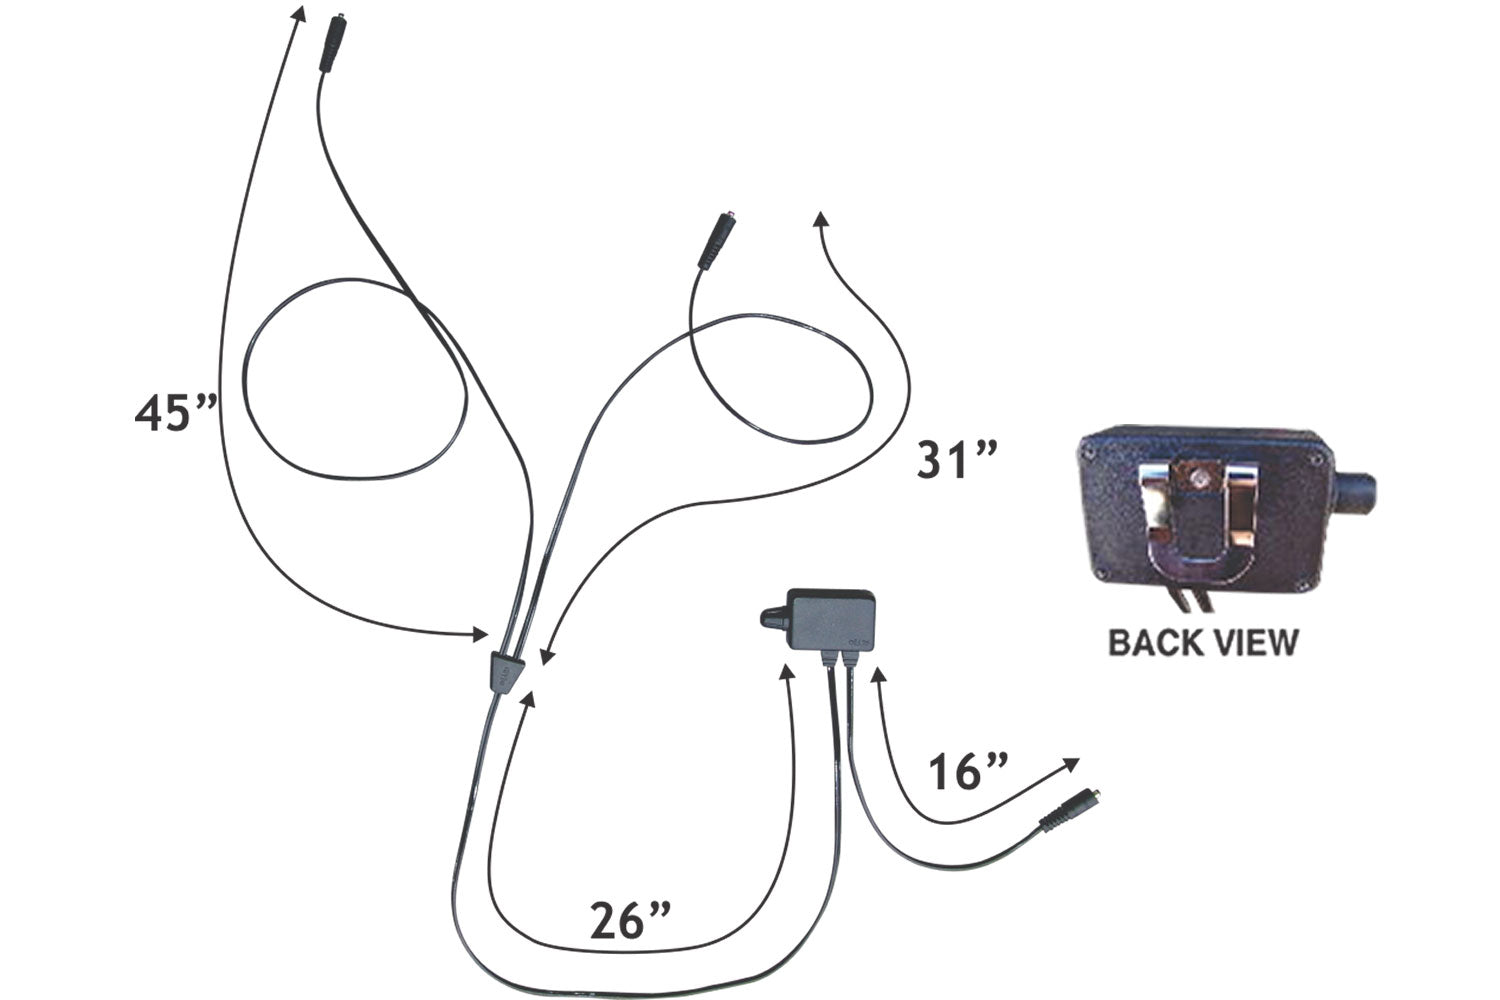 Black cords from a temperature controller with length and controller back view